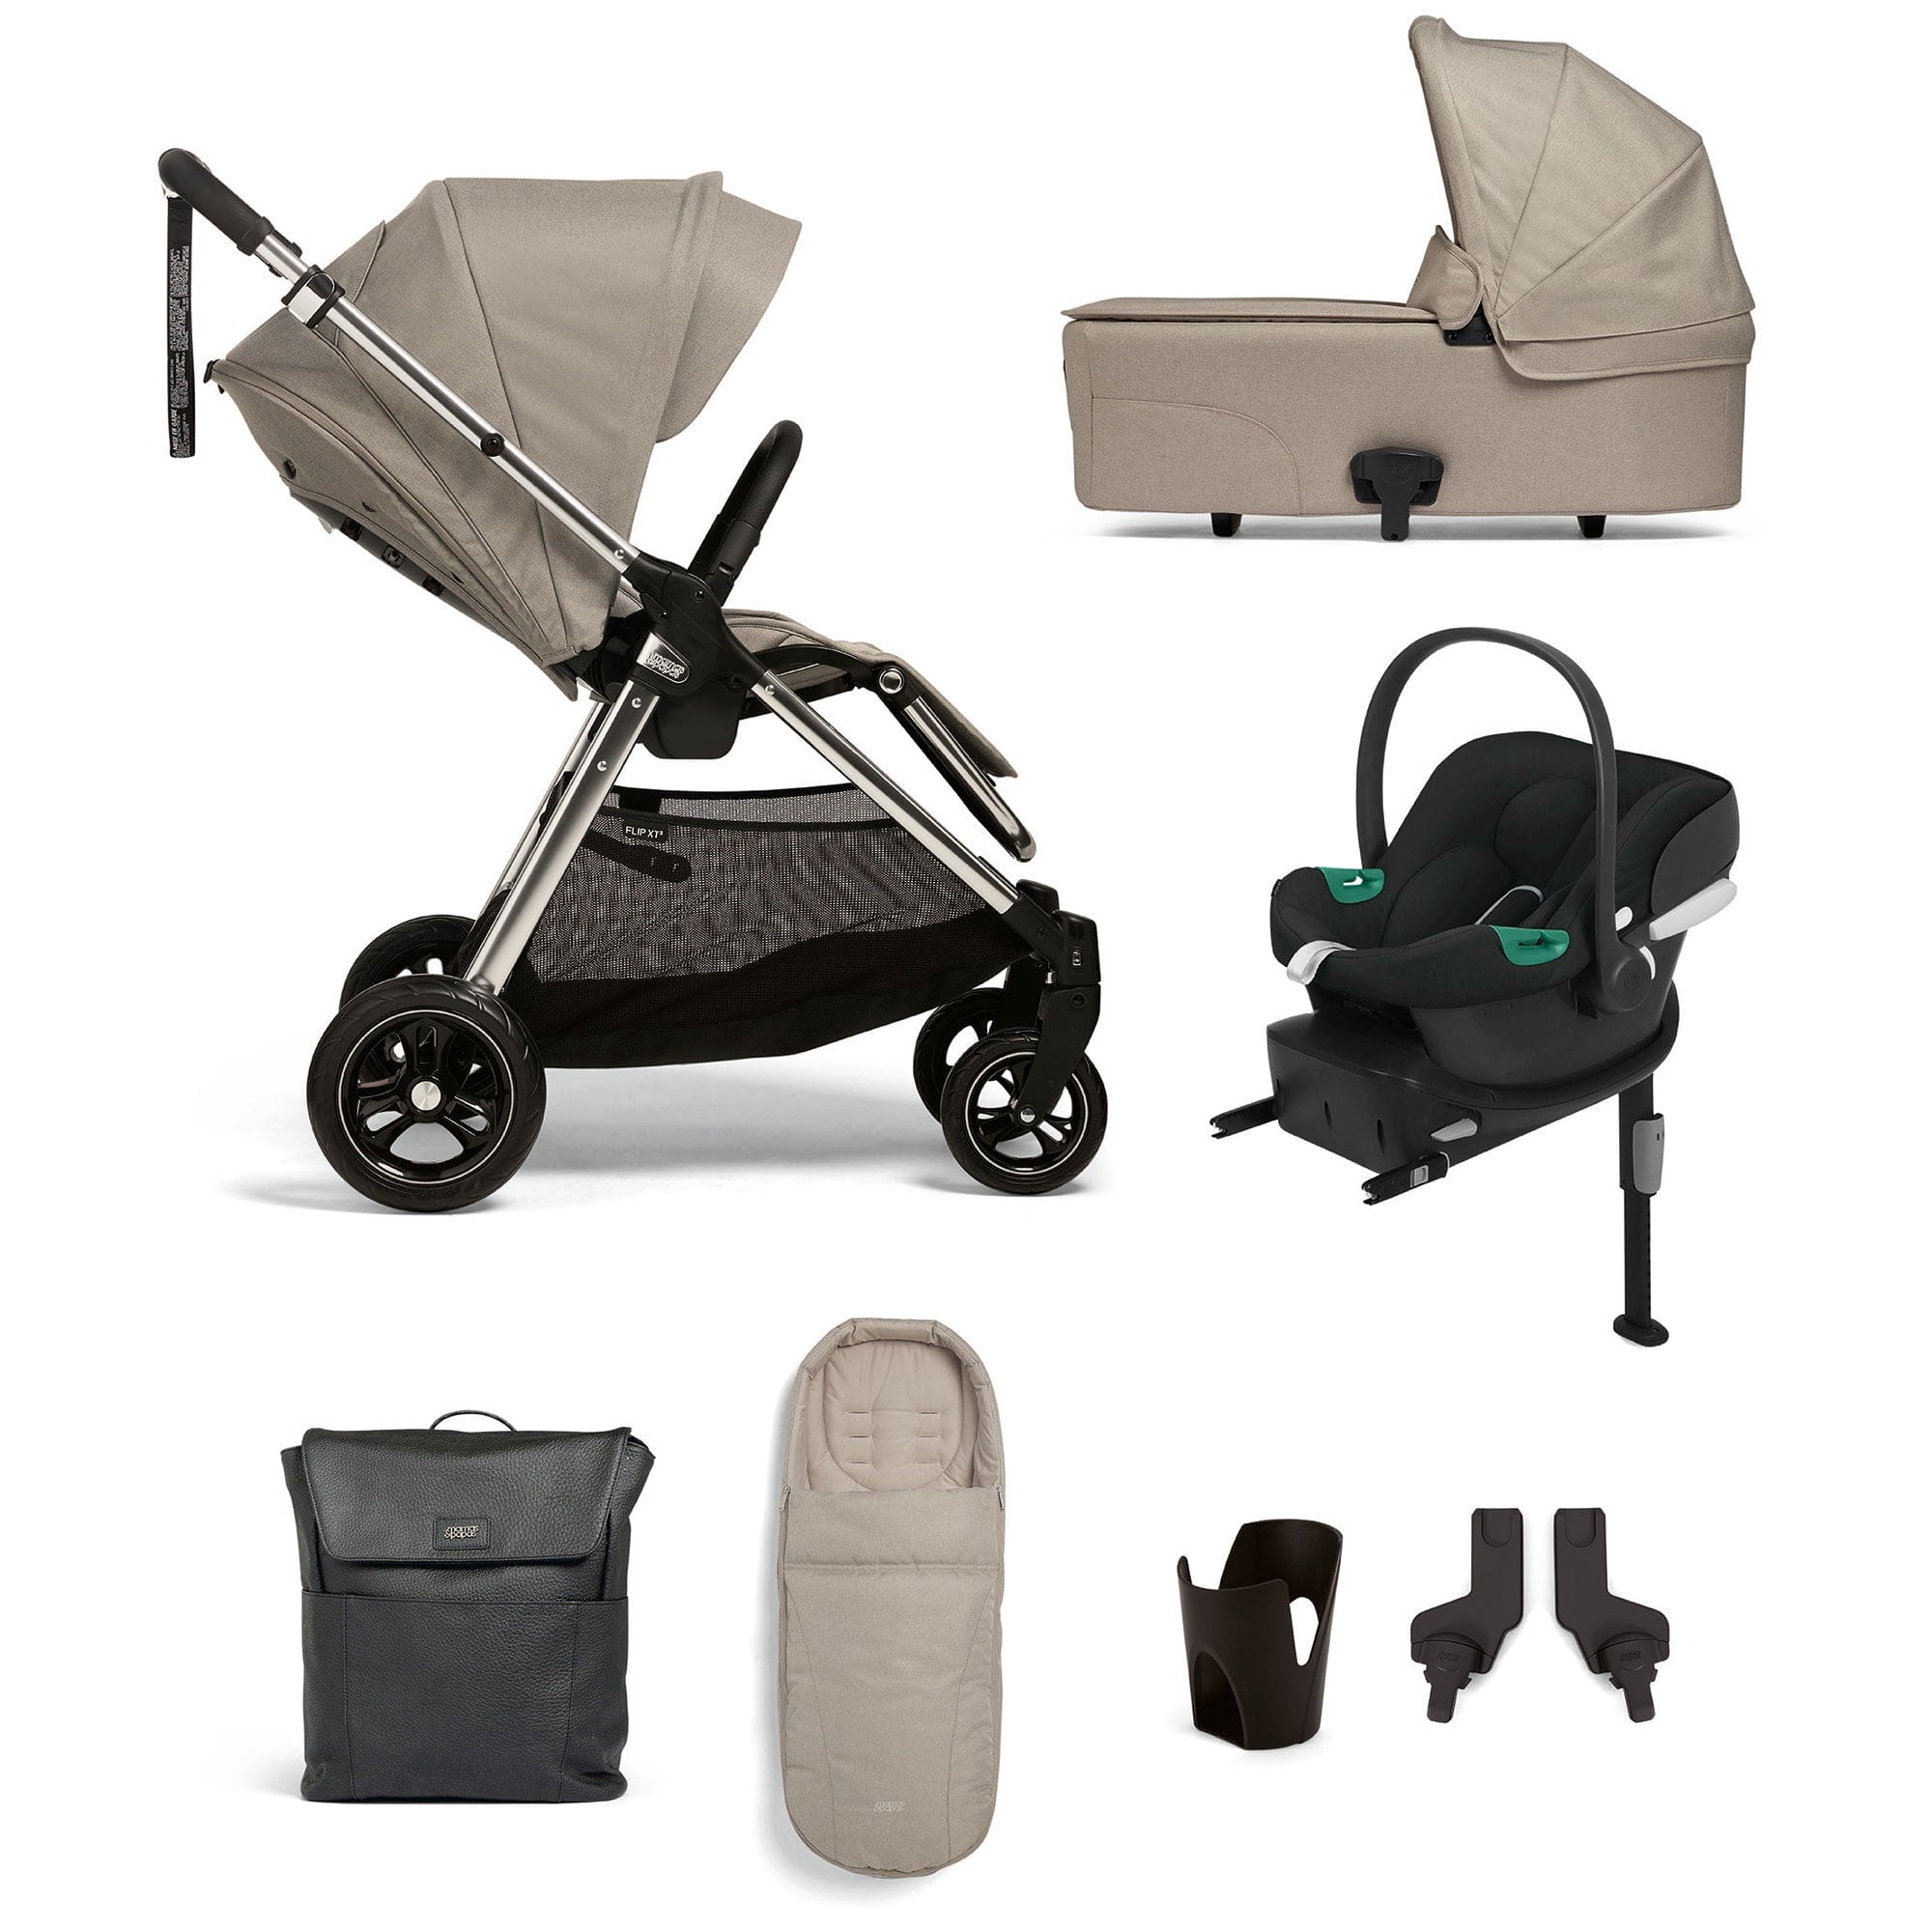 Mamas & Papas Flip XT³ 8 Piece Essentials Bundle with Car Seat in Fawn Travel Systems 61941FN00 5063229087394